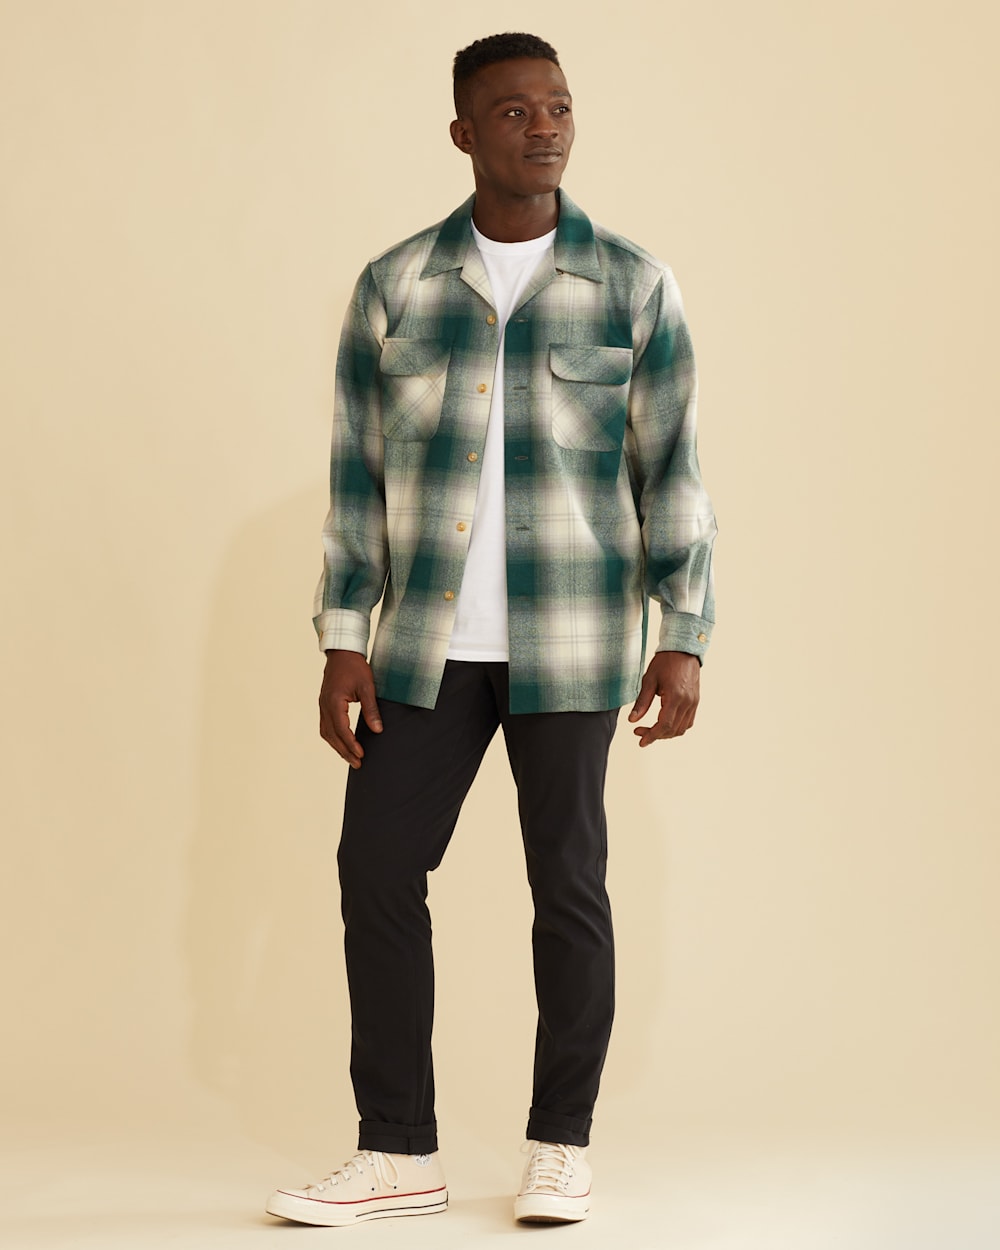 ALTERNATE VIEW OF MEN'S PLAID BOARD SHIRT IN GREEN/WHITE OMBRE image number 3